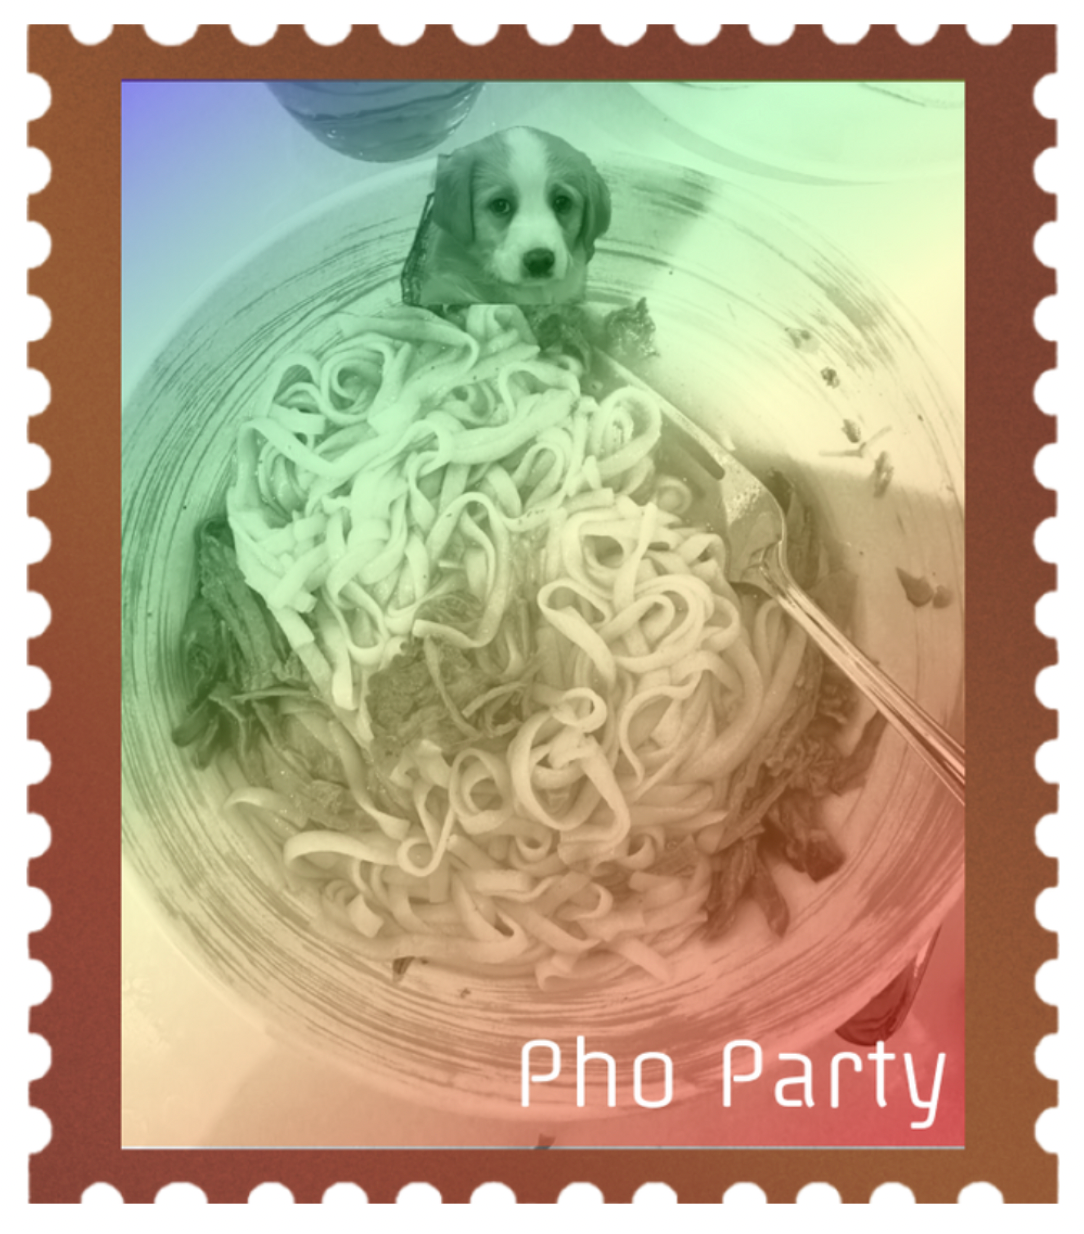 Pho Party